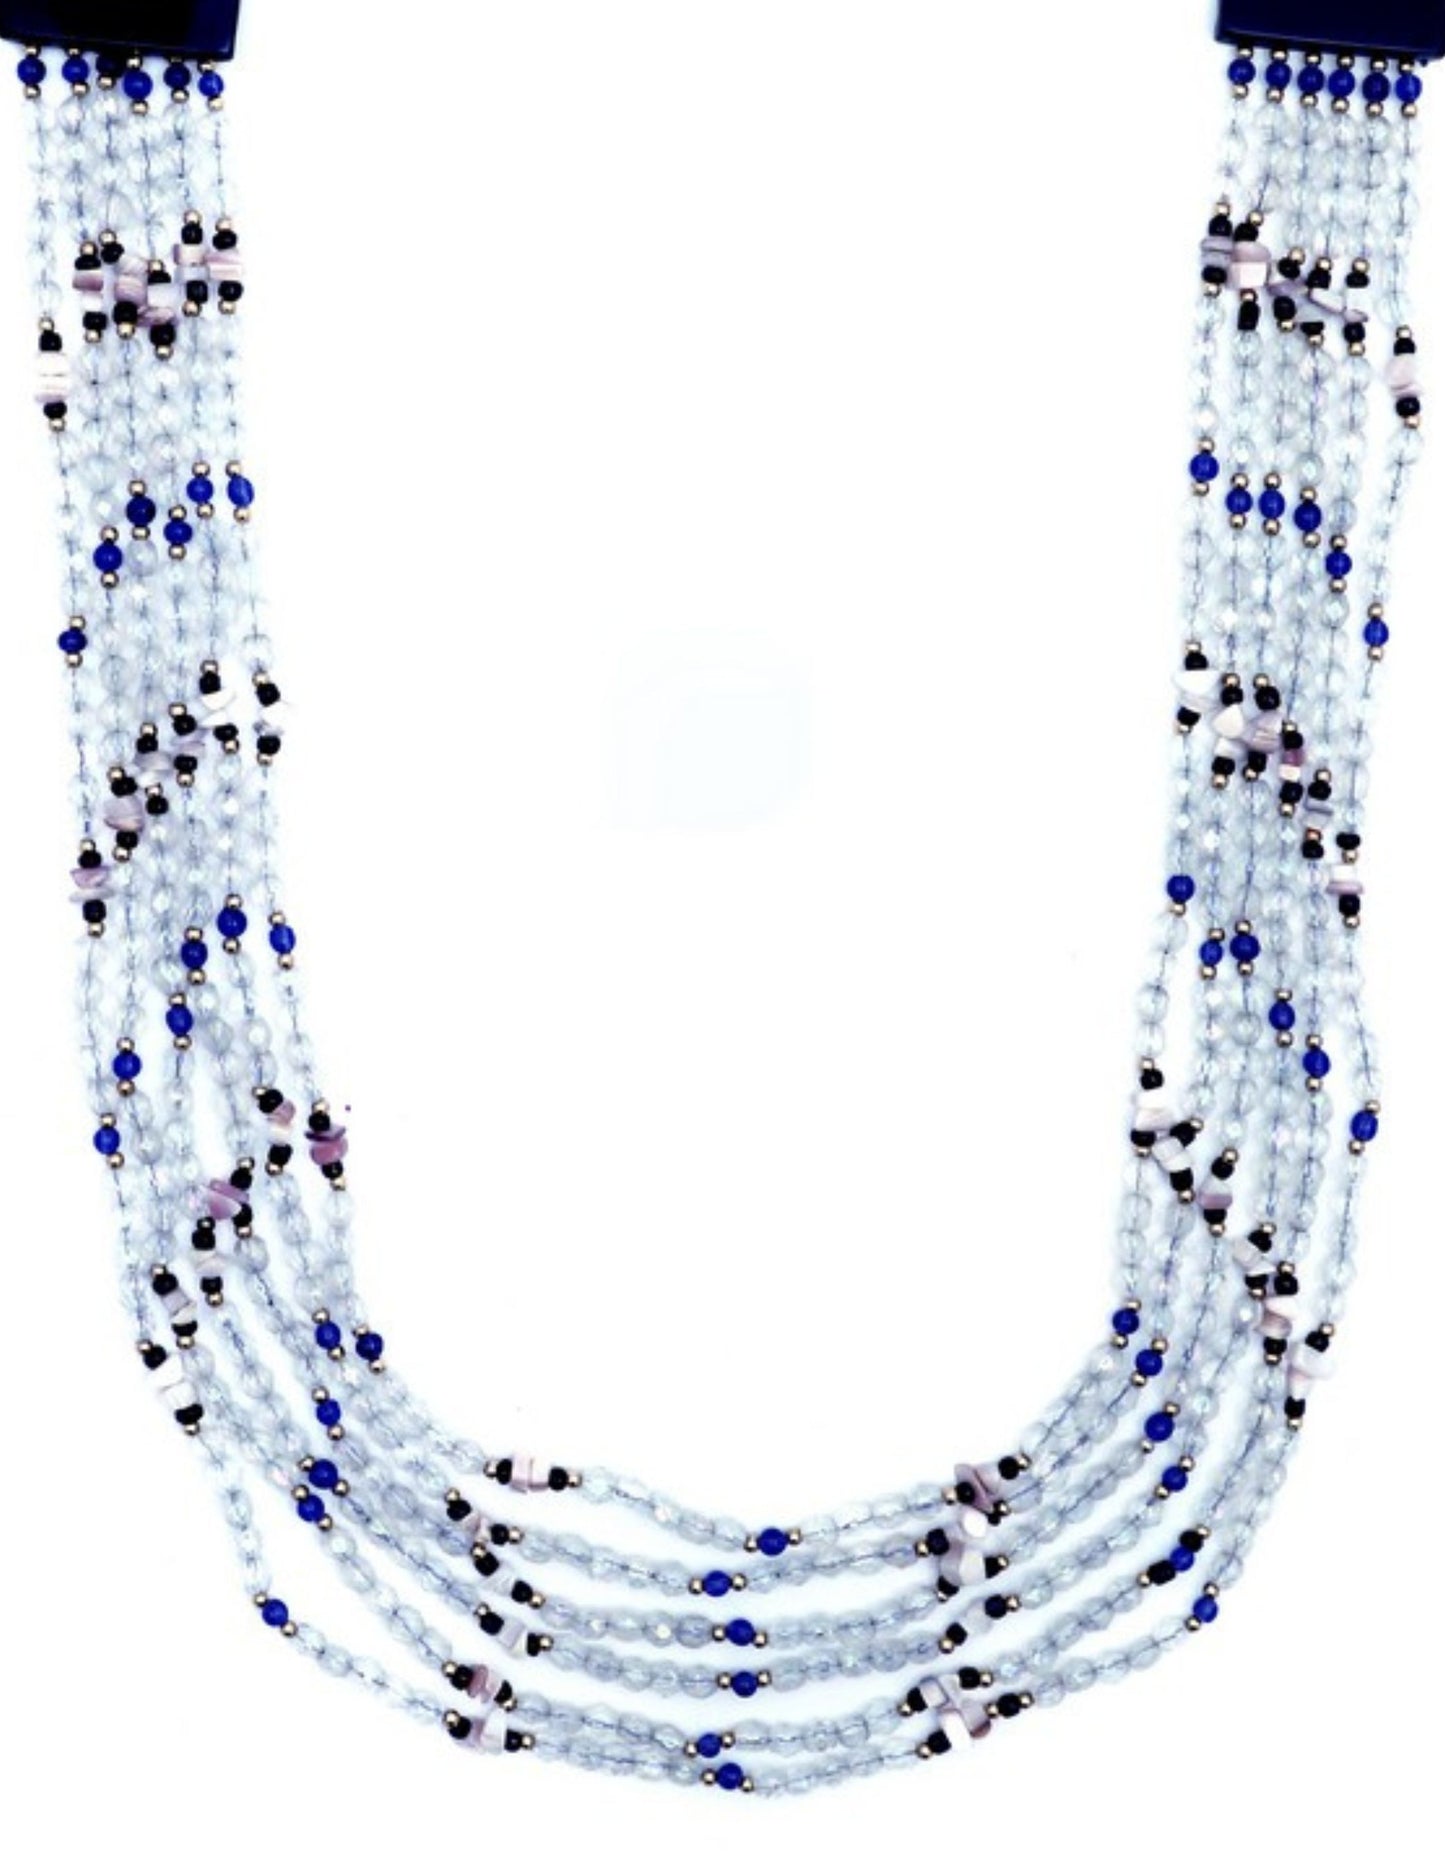 Multilayered transparent beads with stone